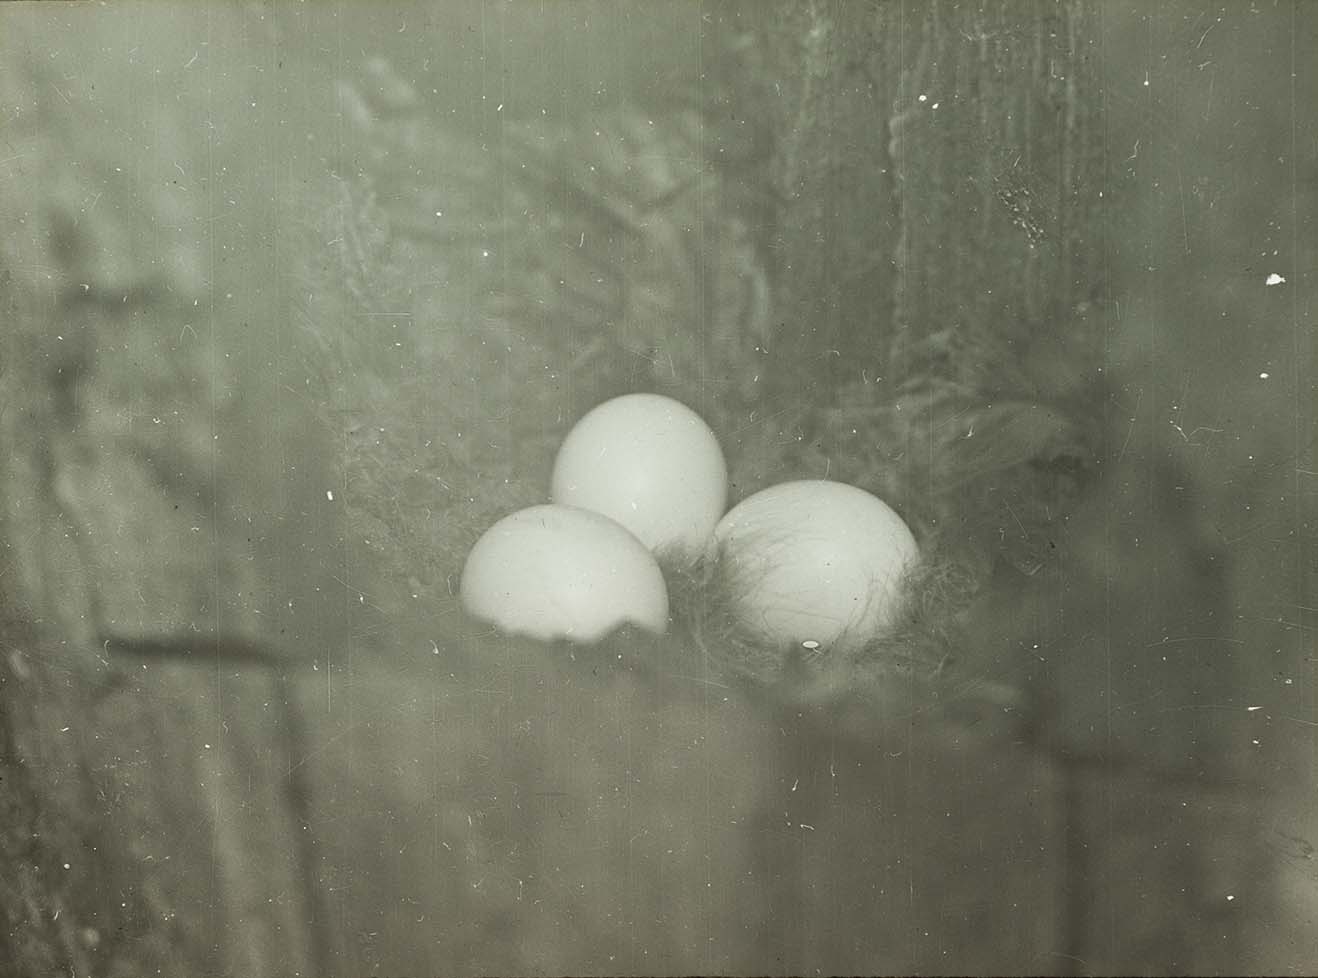 Lantern slide and photograph of eggs in a Barred Owl nest